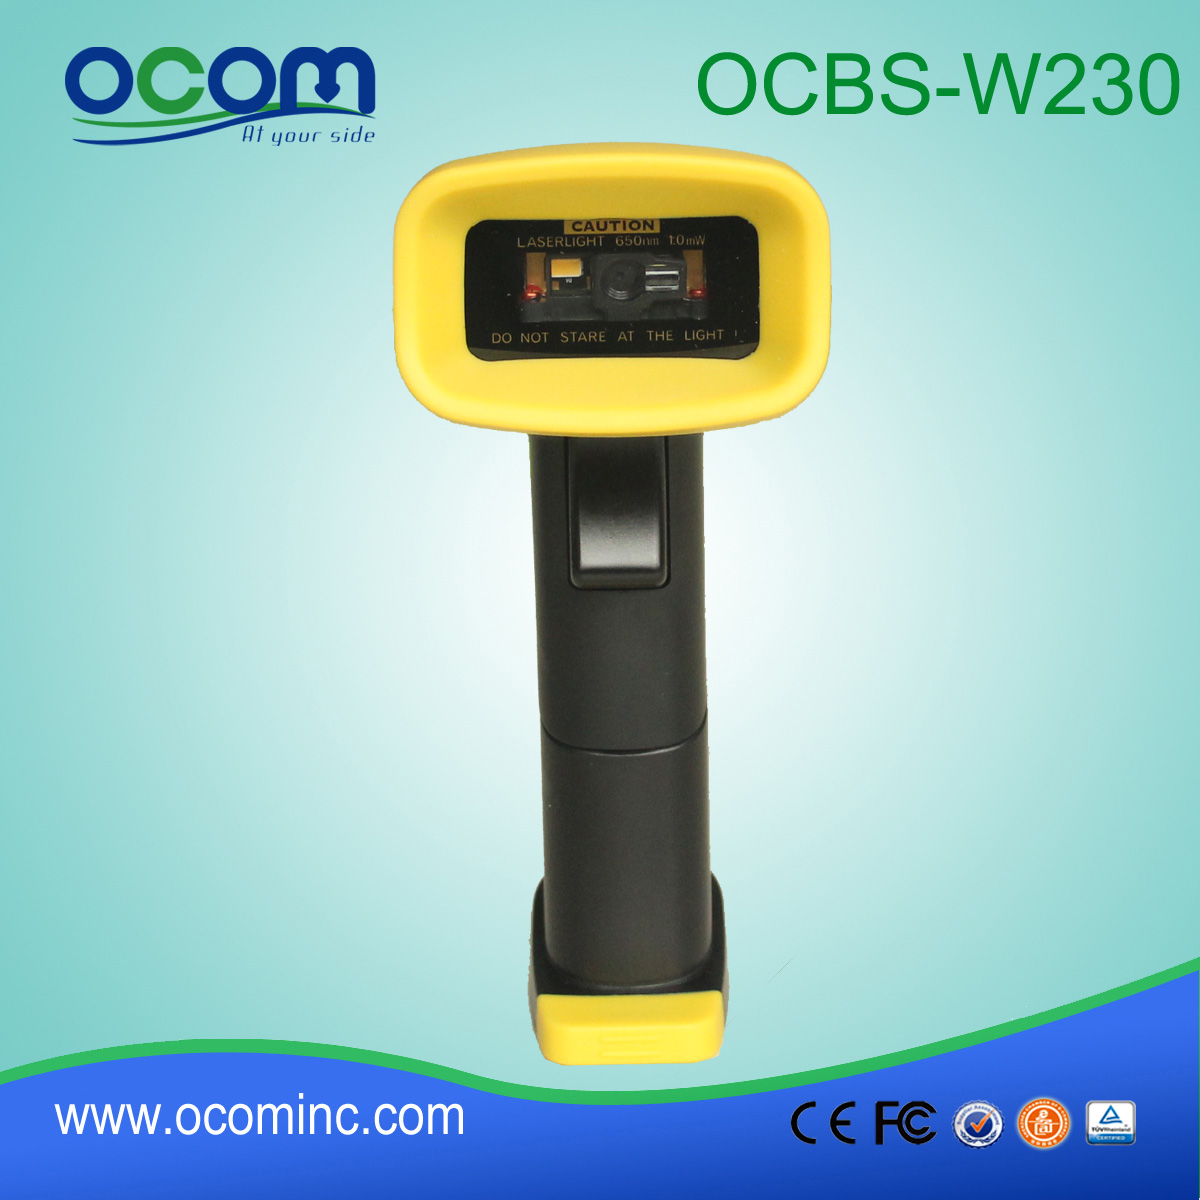 Cina android barcode scanner palmare 433MHz wireless